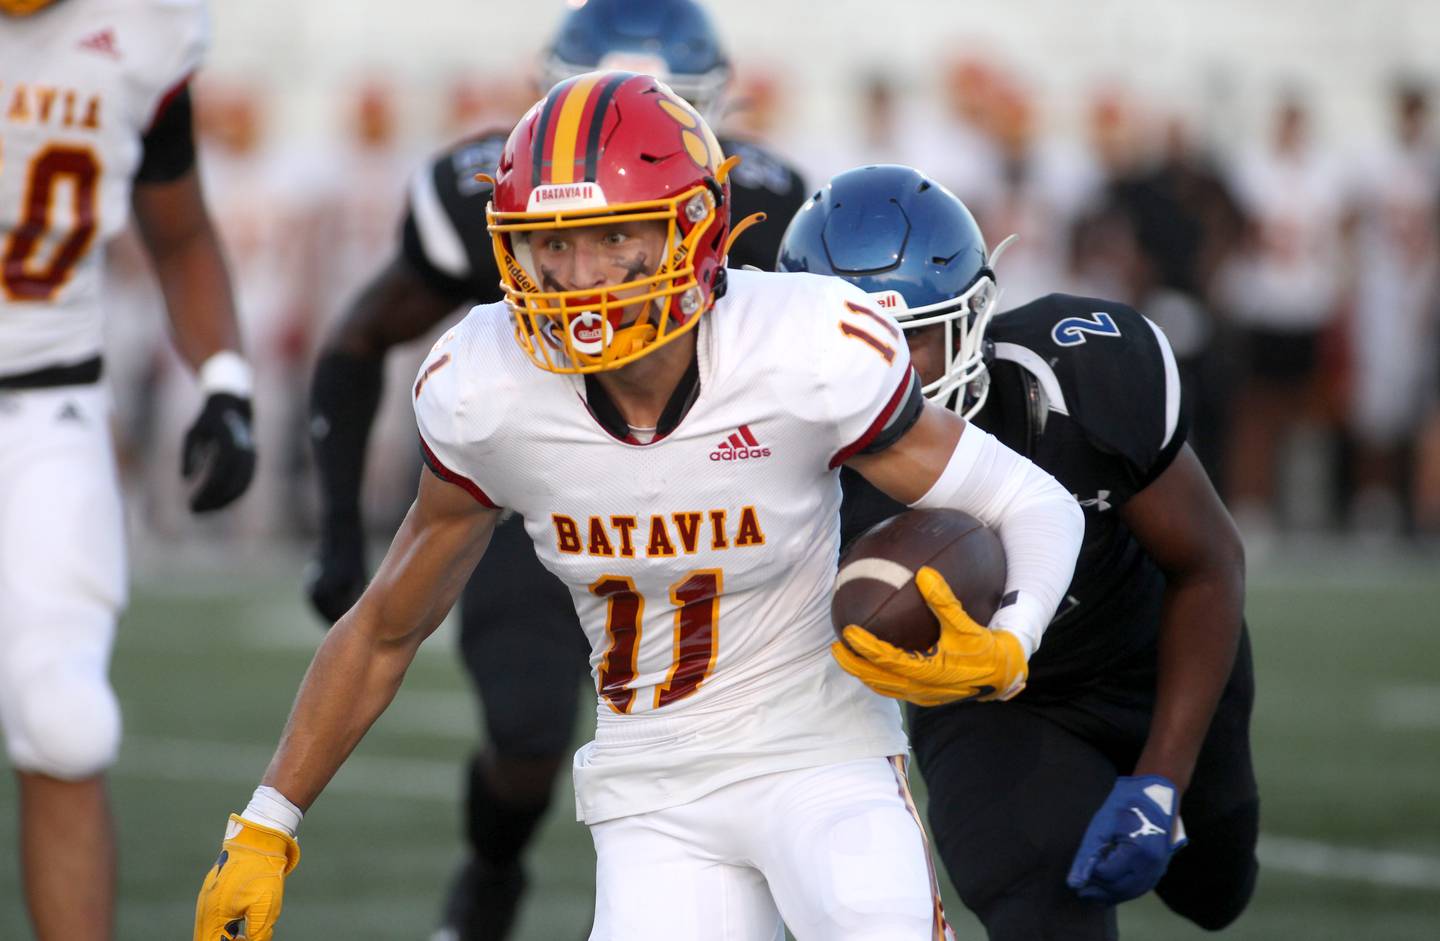 Batavia’s Drew Gerke runs the ball during a game against Phillips at Gately Stadium in Chicago on Saturday, Aug. 27, 2022.